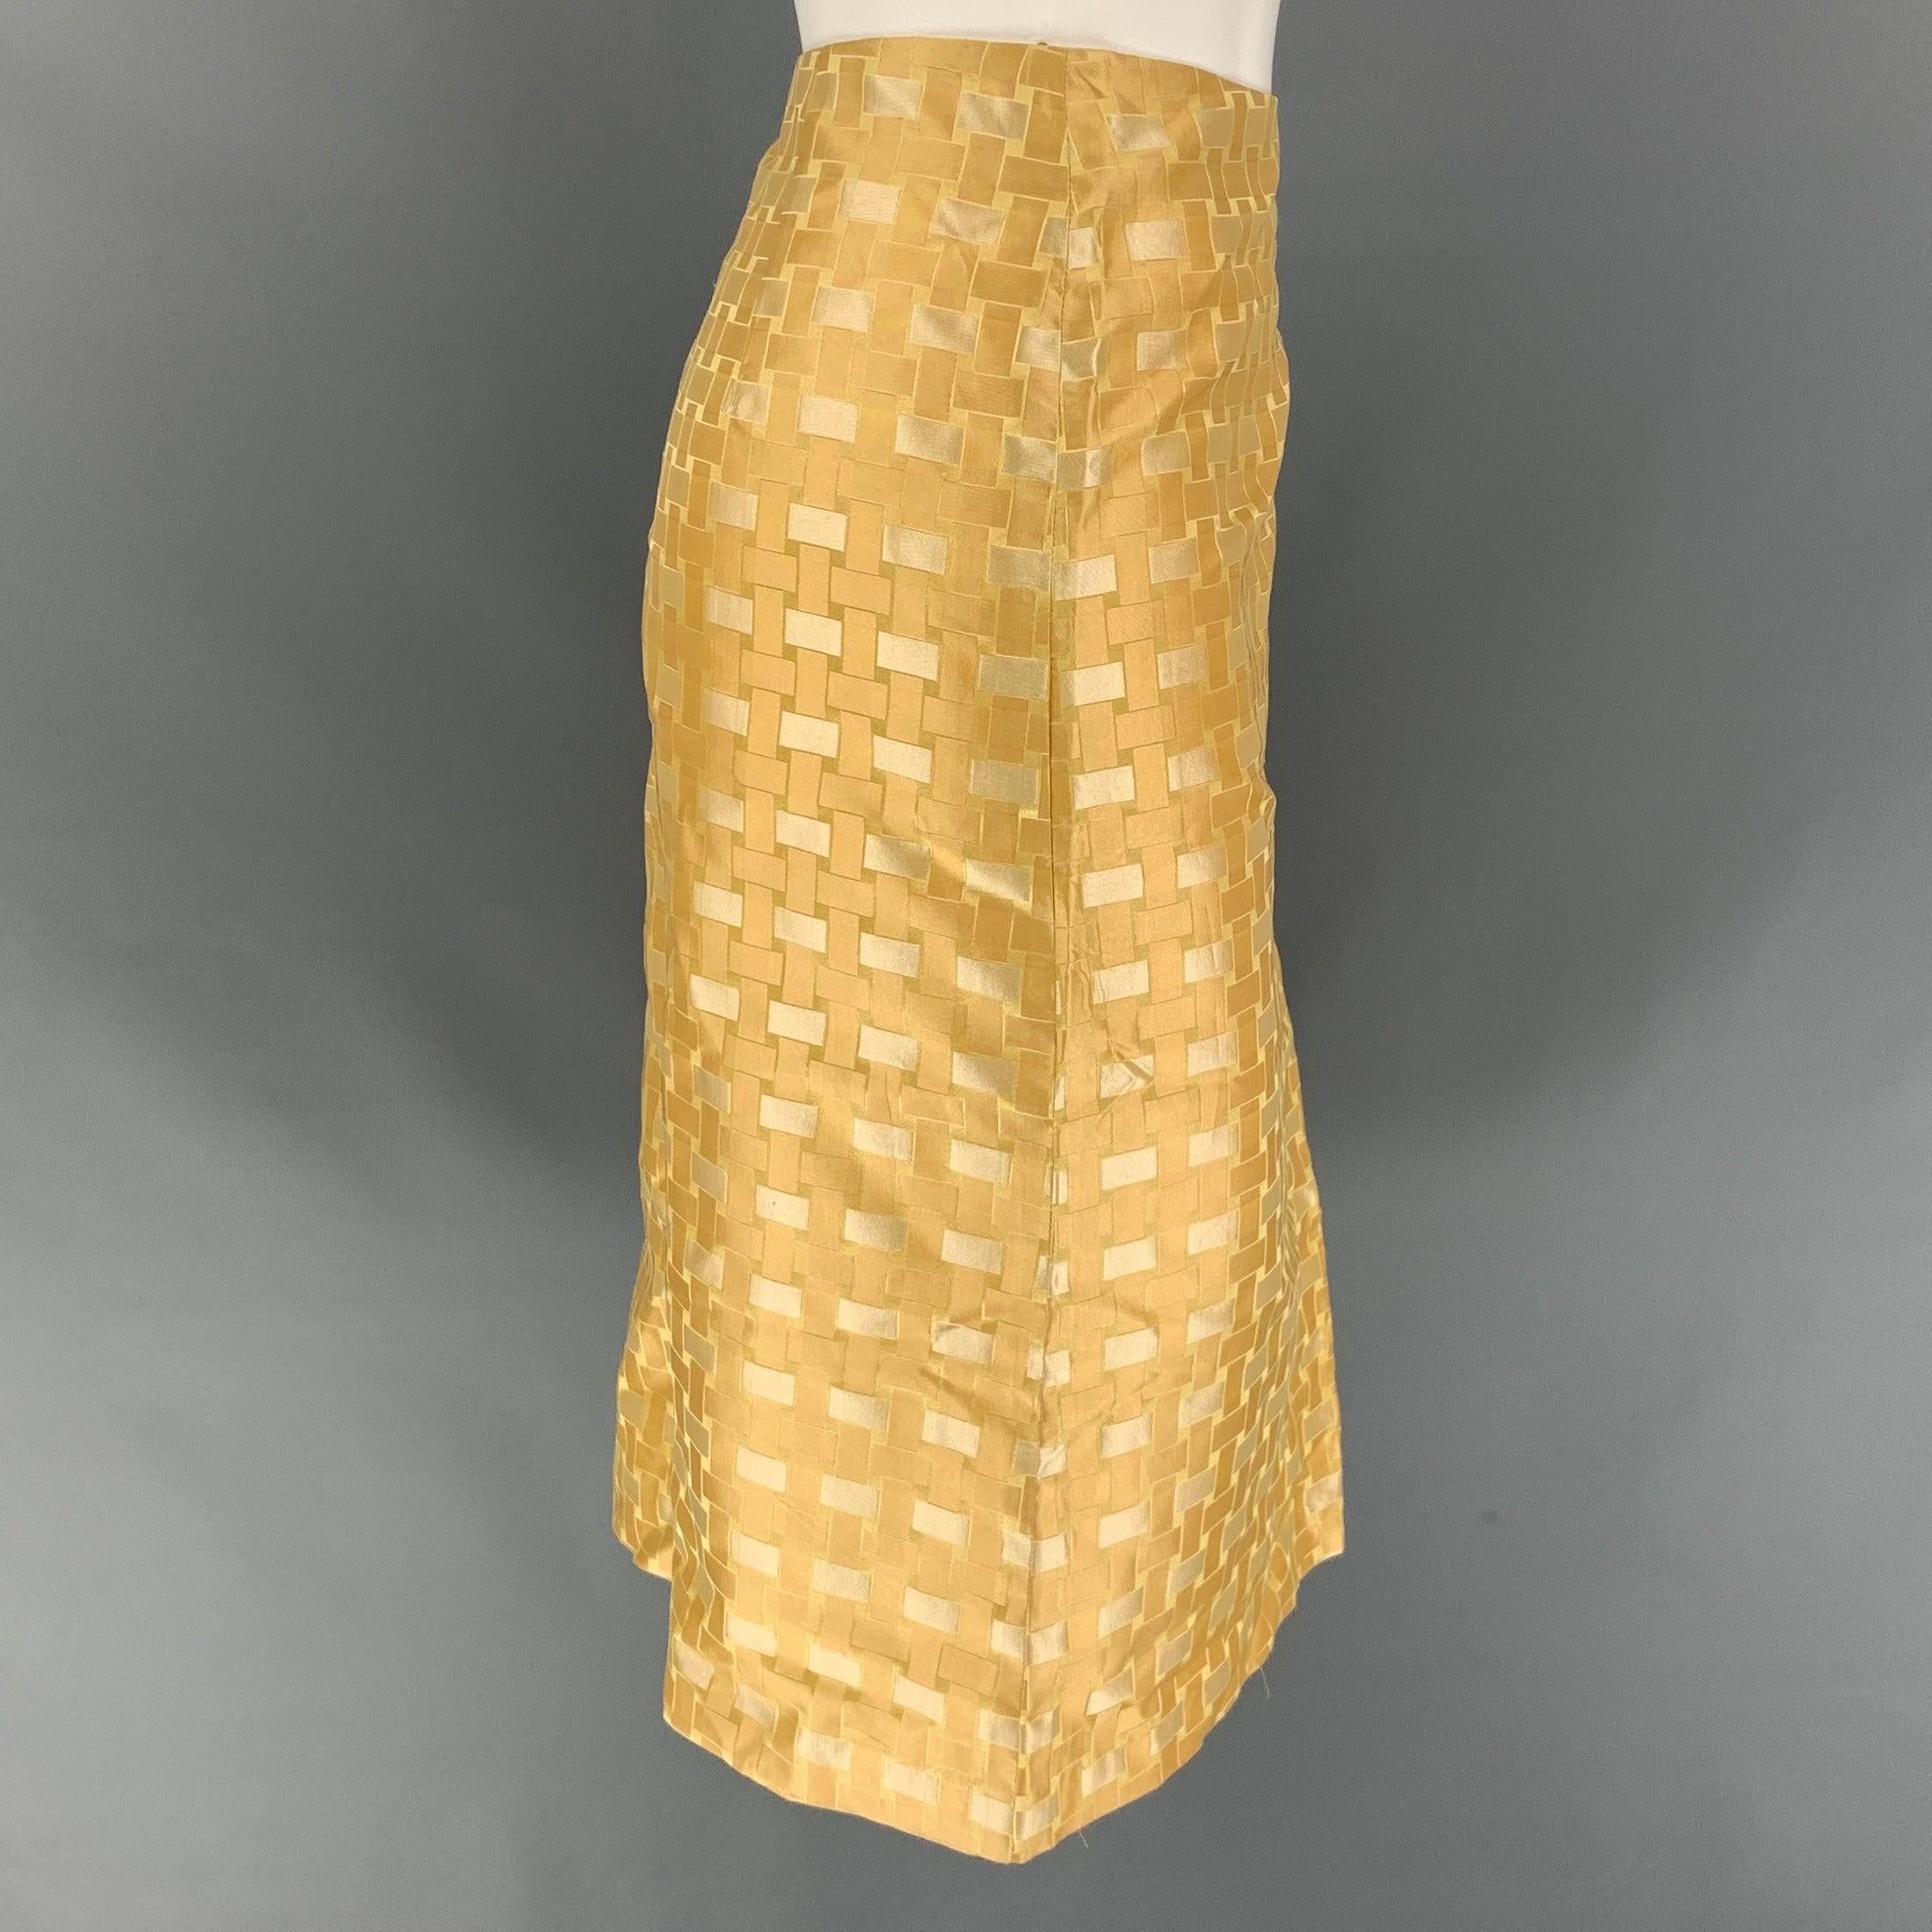 BURBERRY PRORSUM Spring 2006 Size 8 Gold Geomtric Silk Knee-Length Skirt In Good Condition For Sale In San Francisco, CA